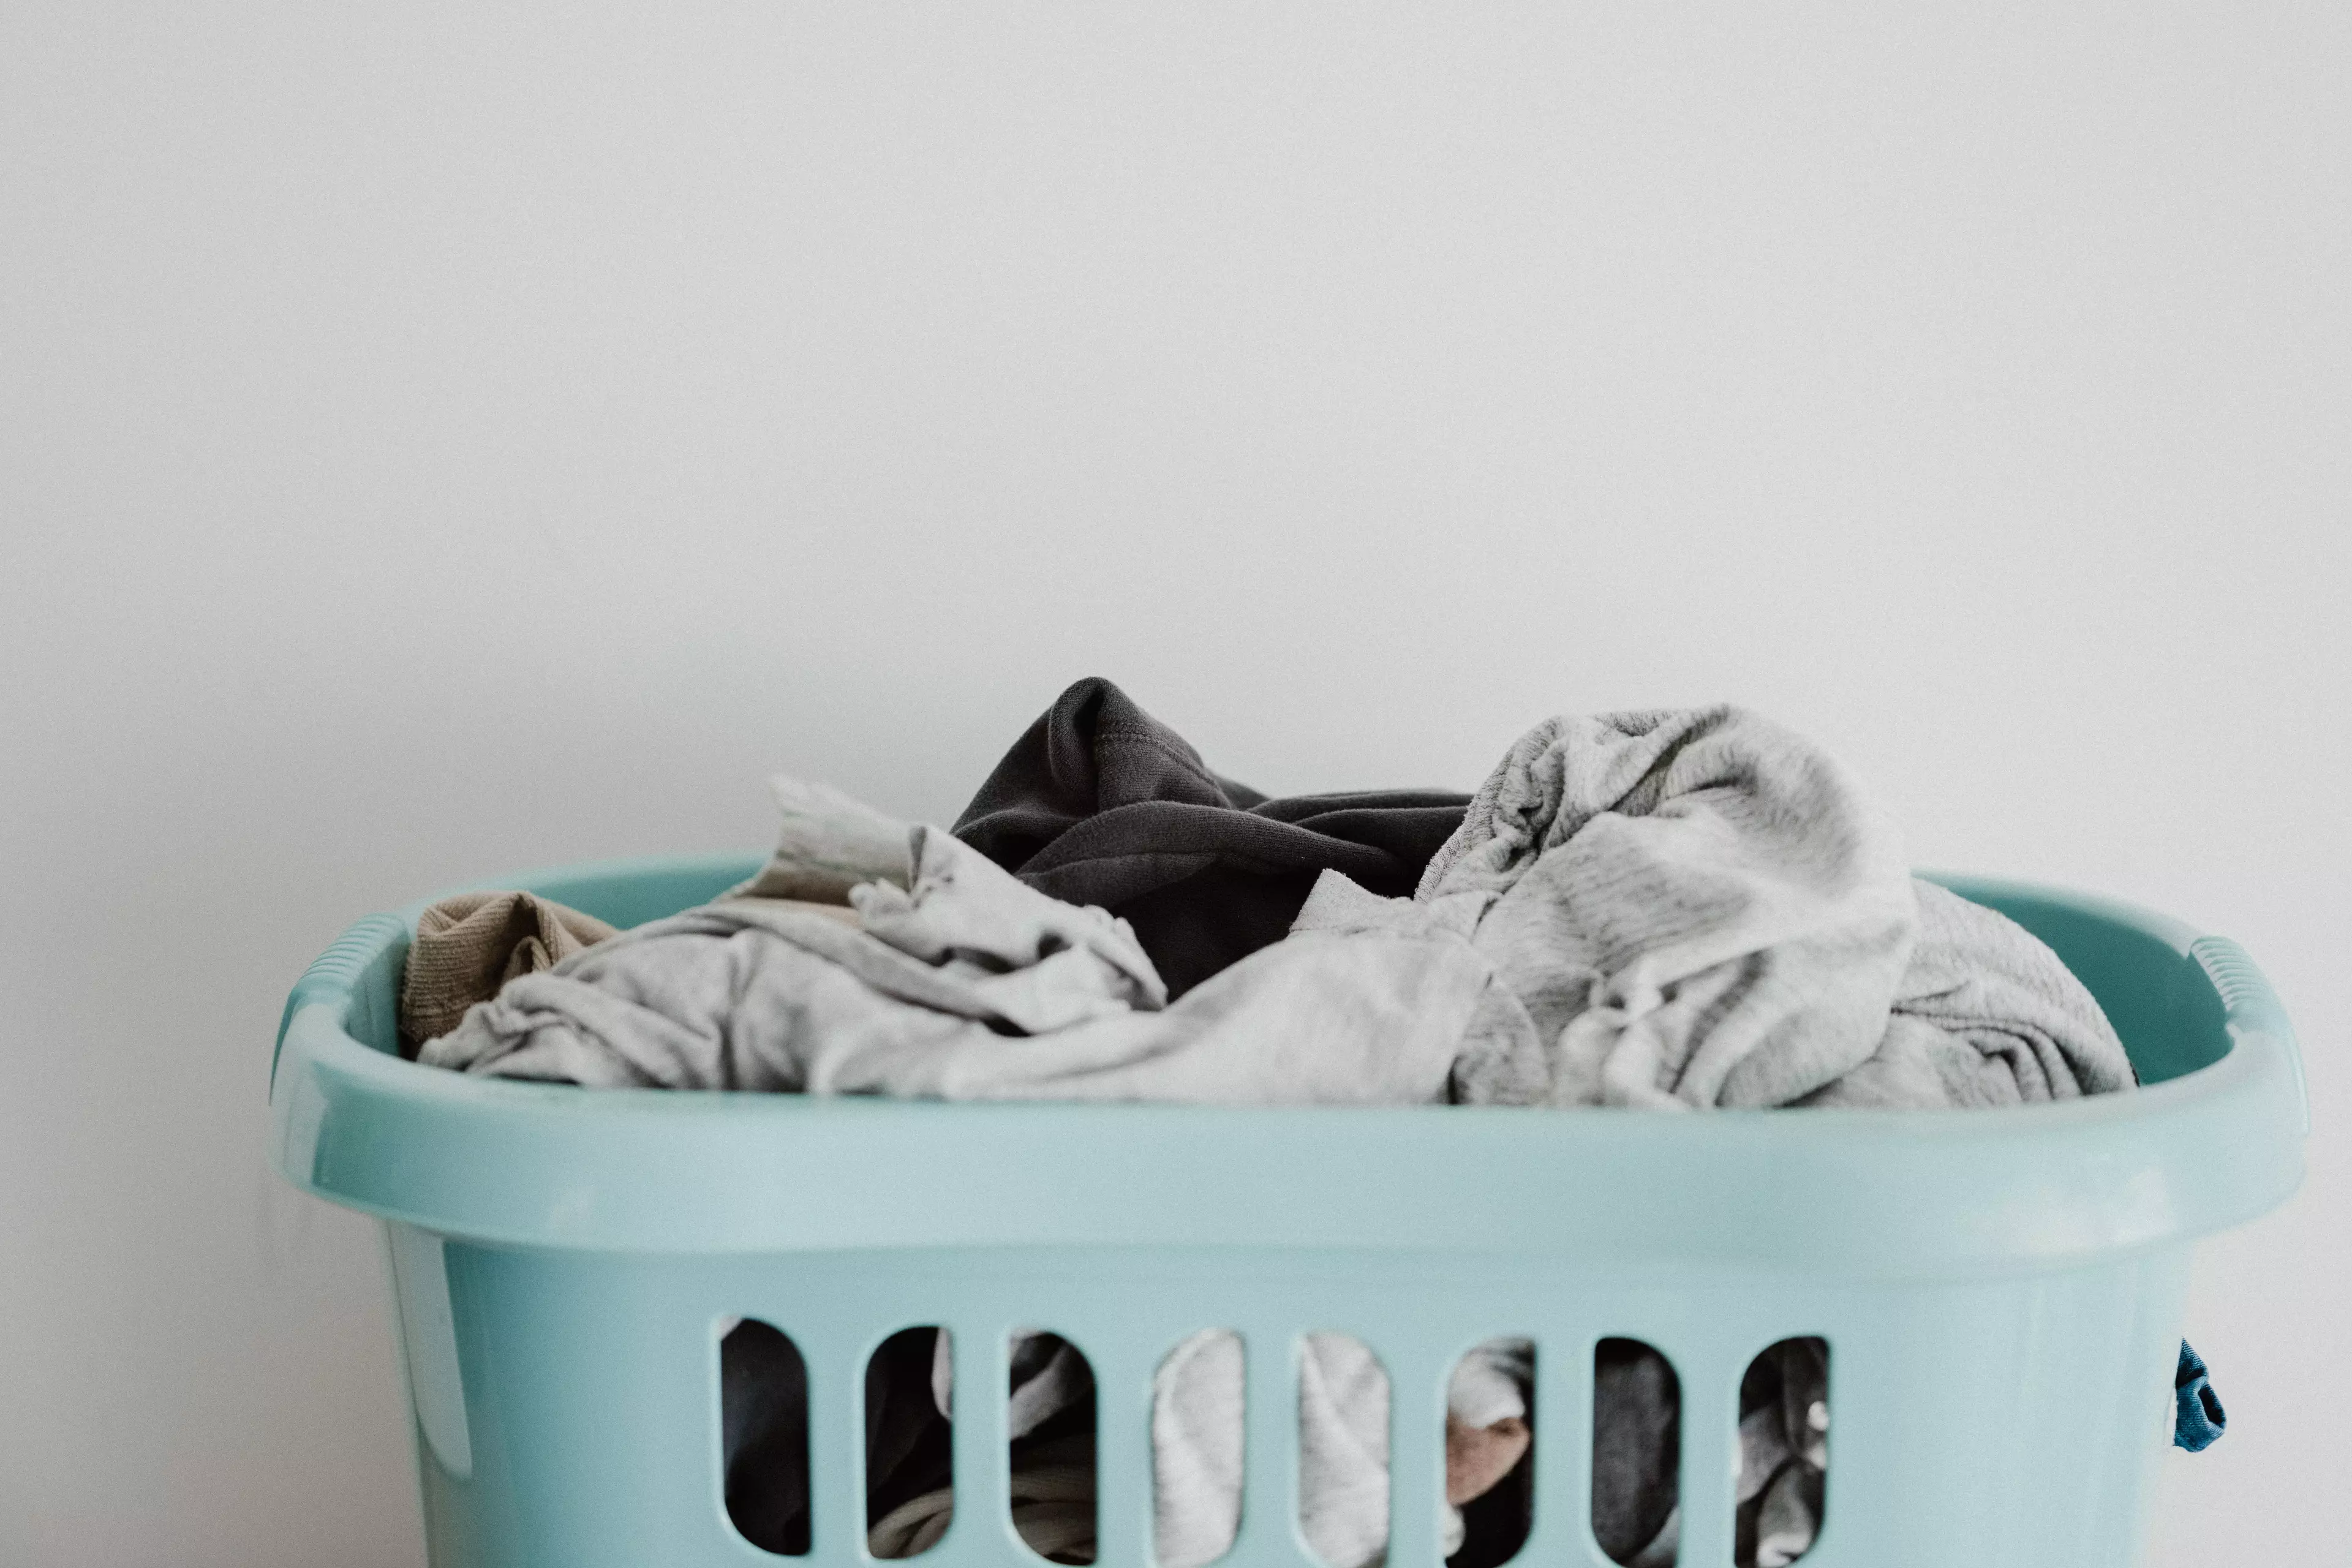 A laundry expert has recommended using ice cubes in the dryer to get clothes crease-free (